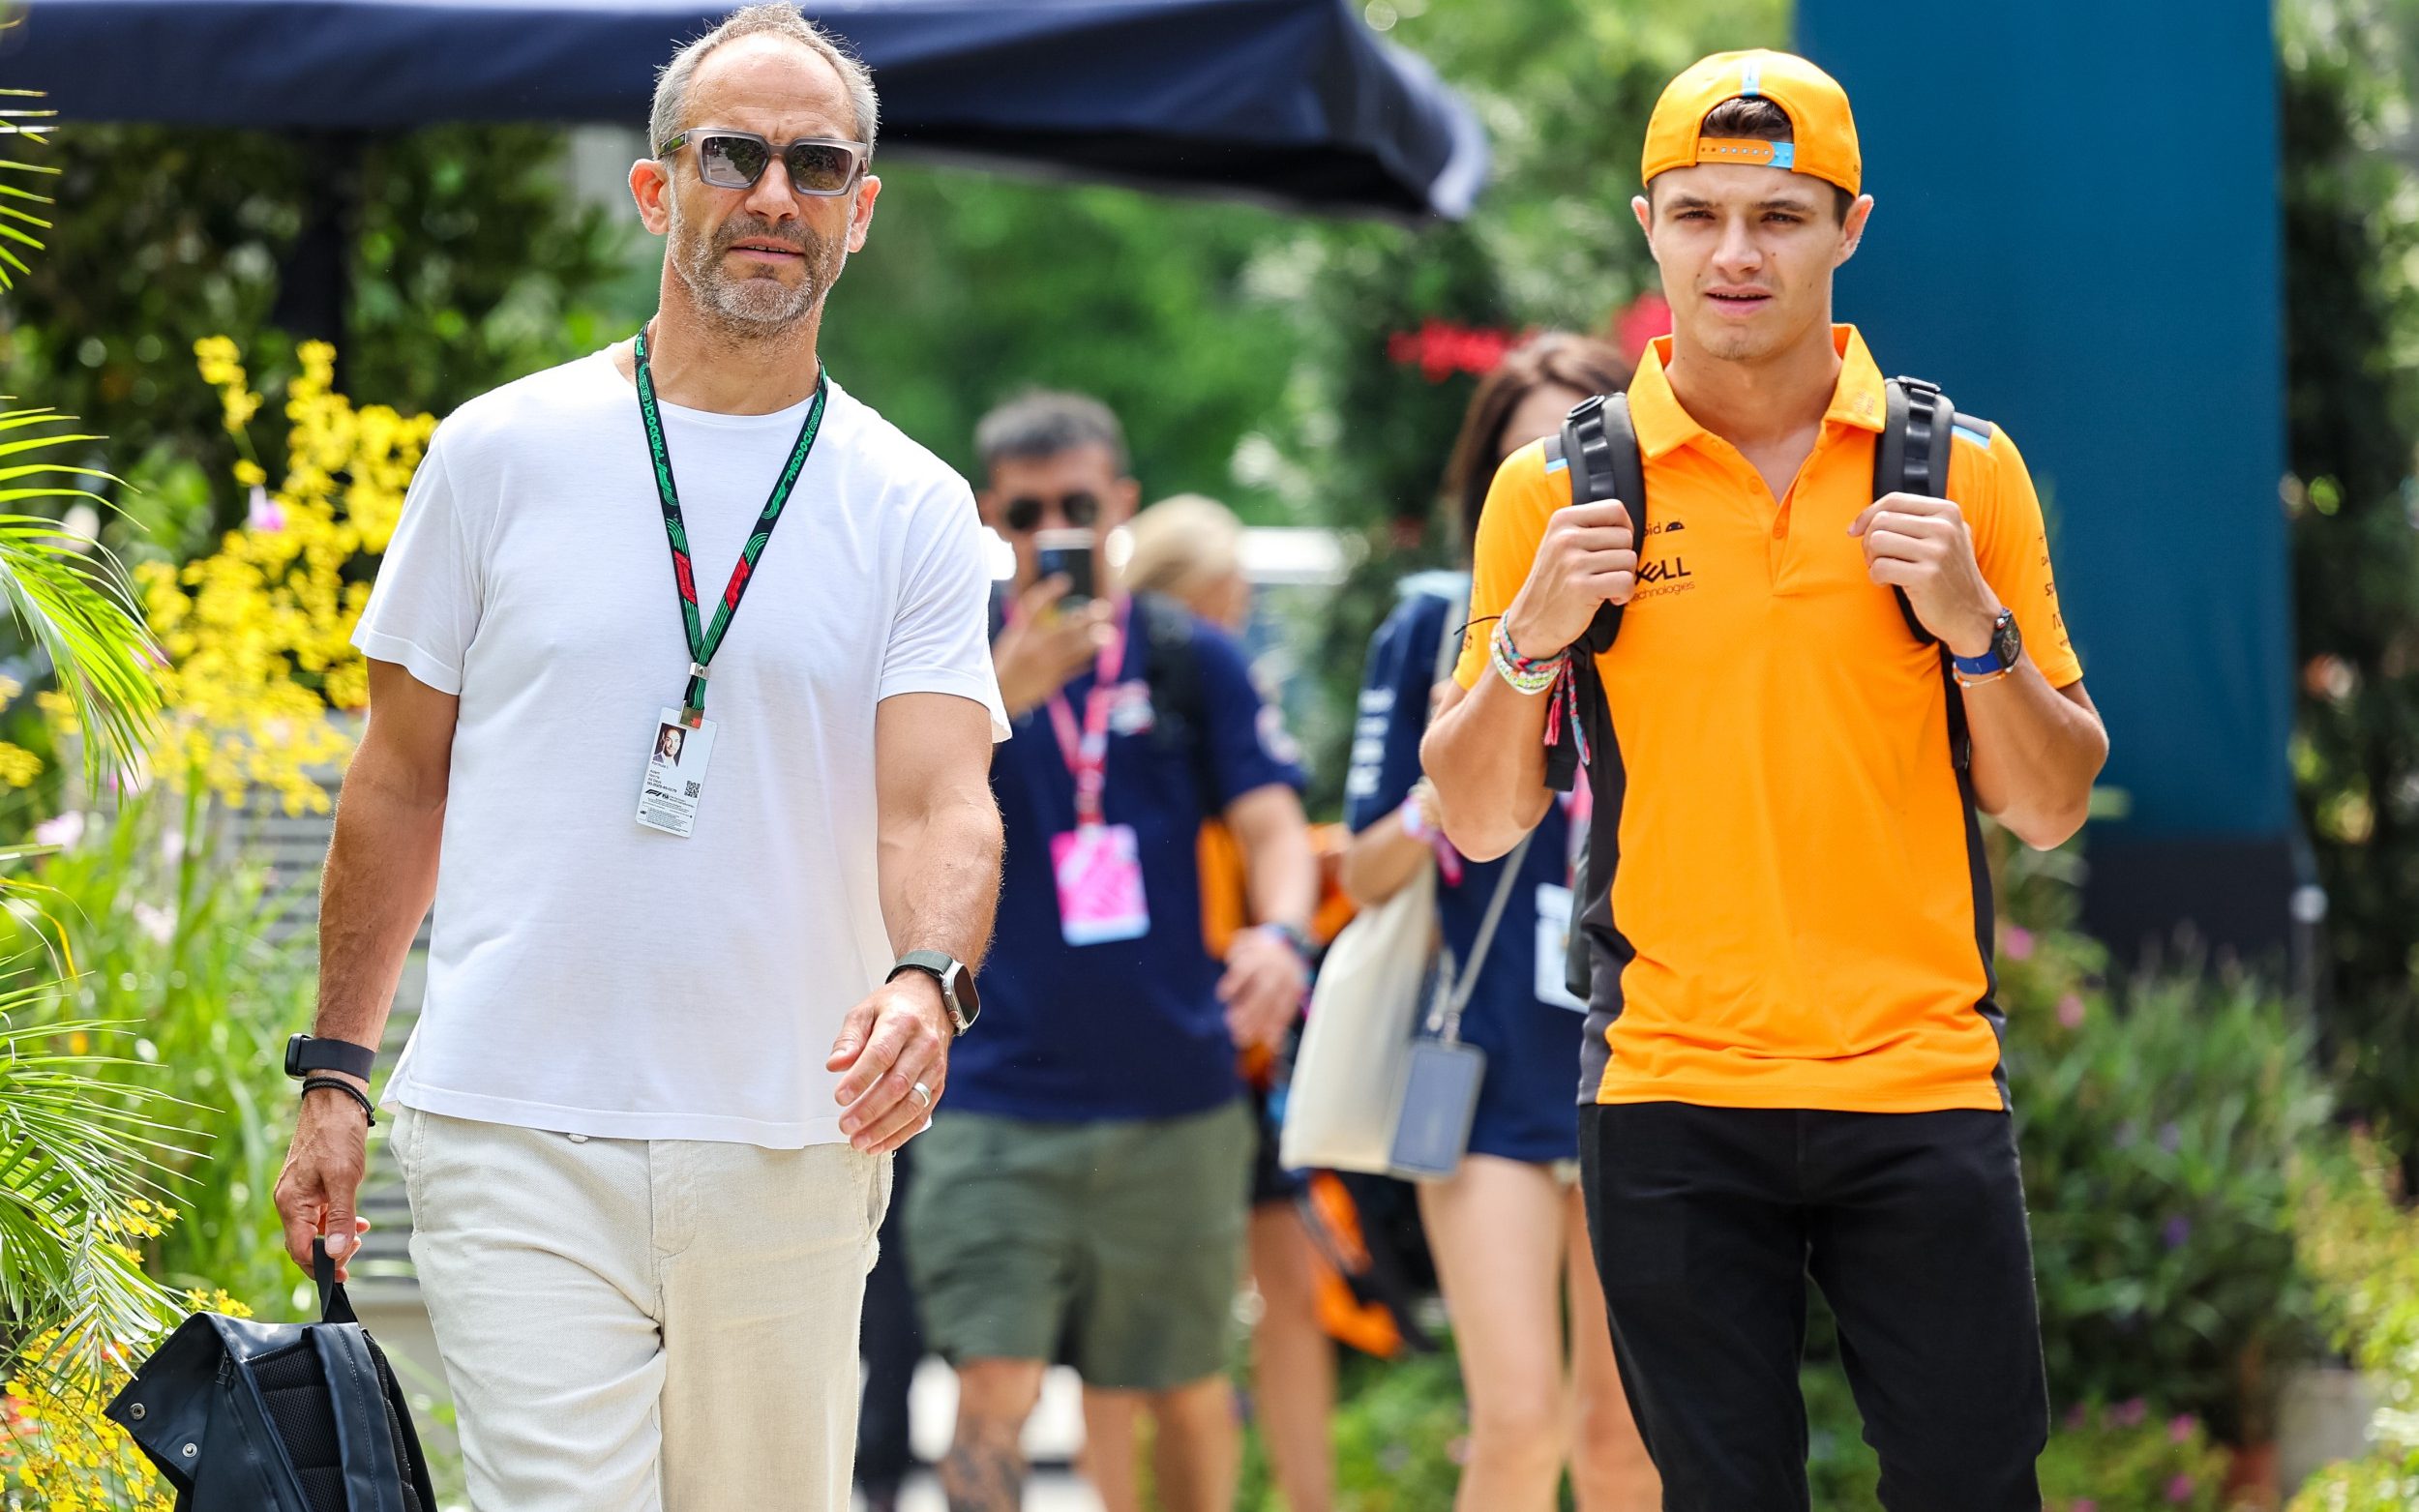 lando norris: son of a millionaire who has the world at his feet after defying bullies